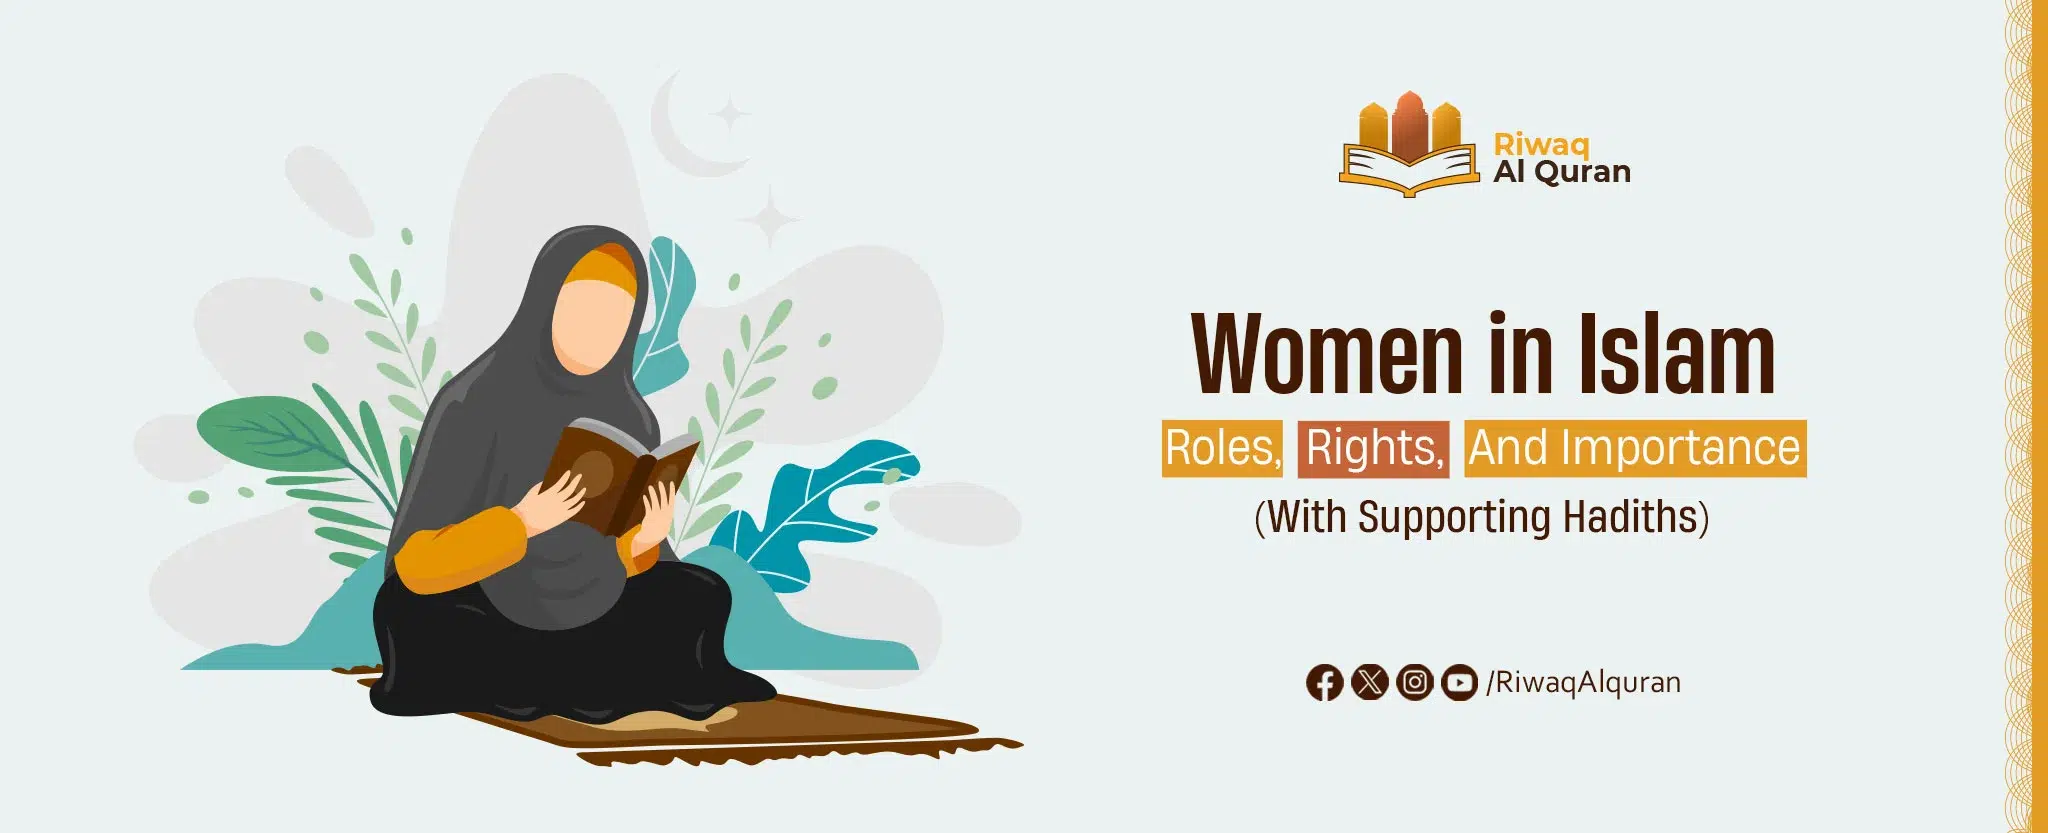 Women in Islam: Roles, Rights, Importance, And Hadiths